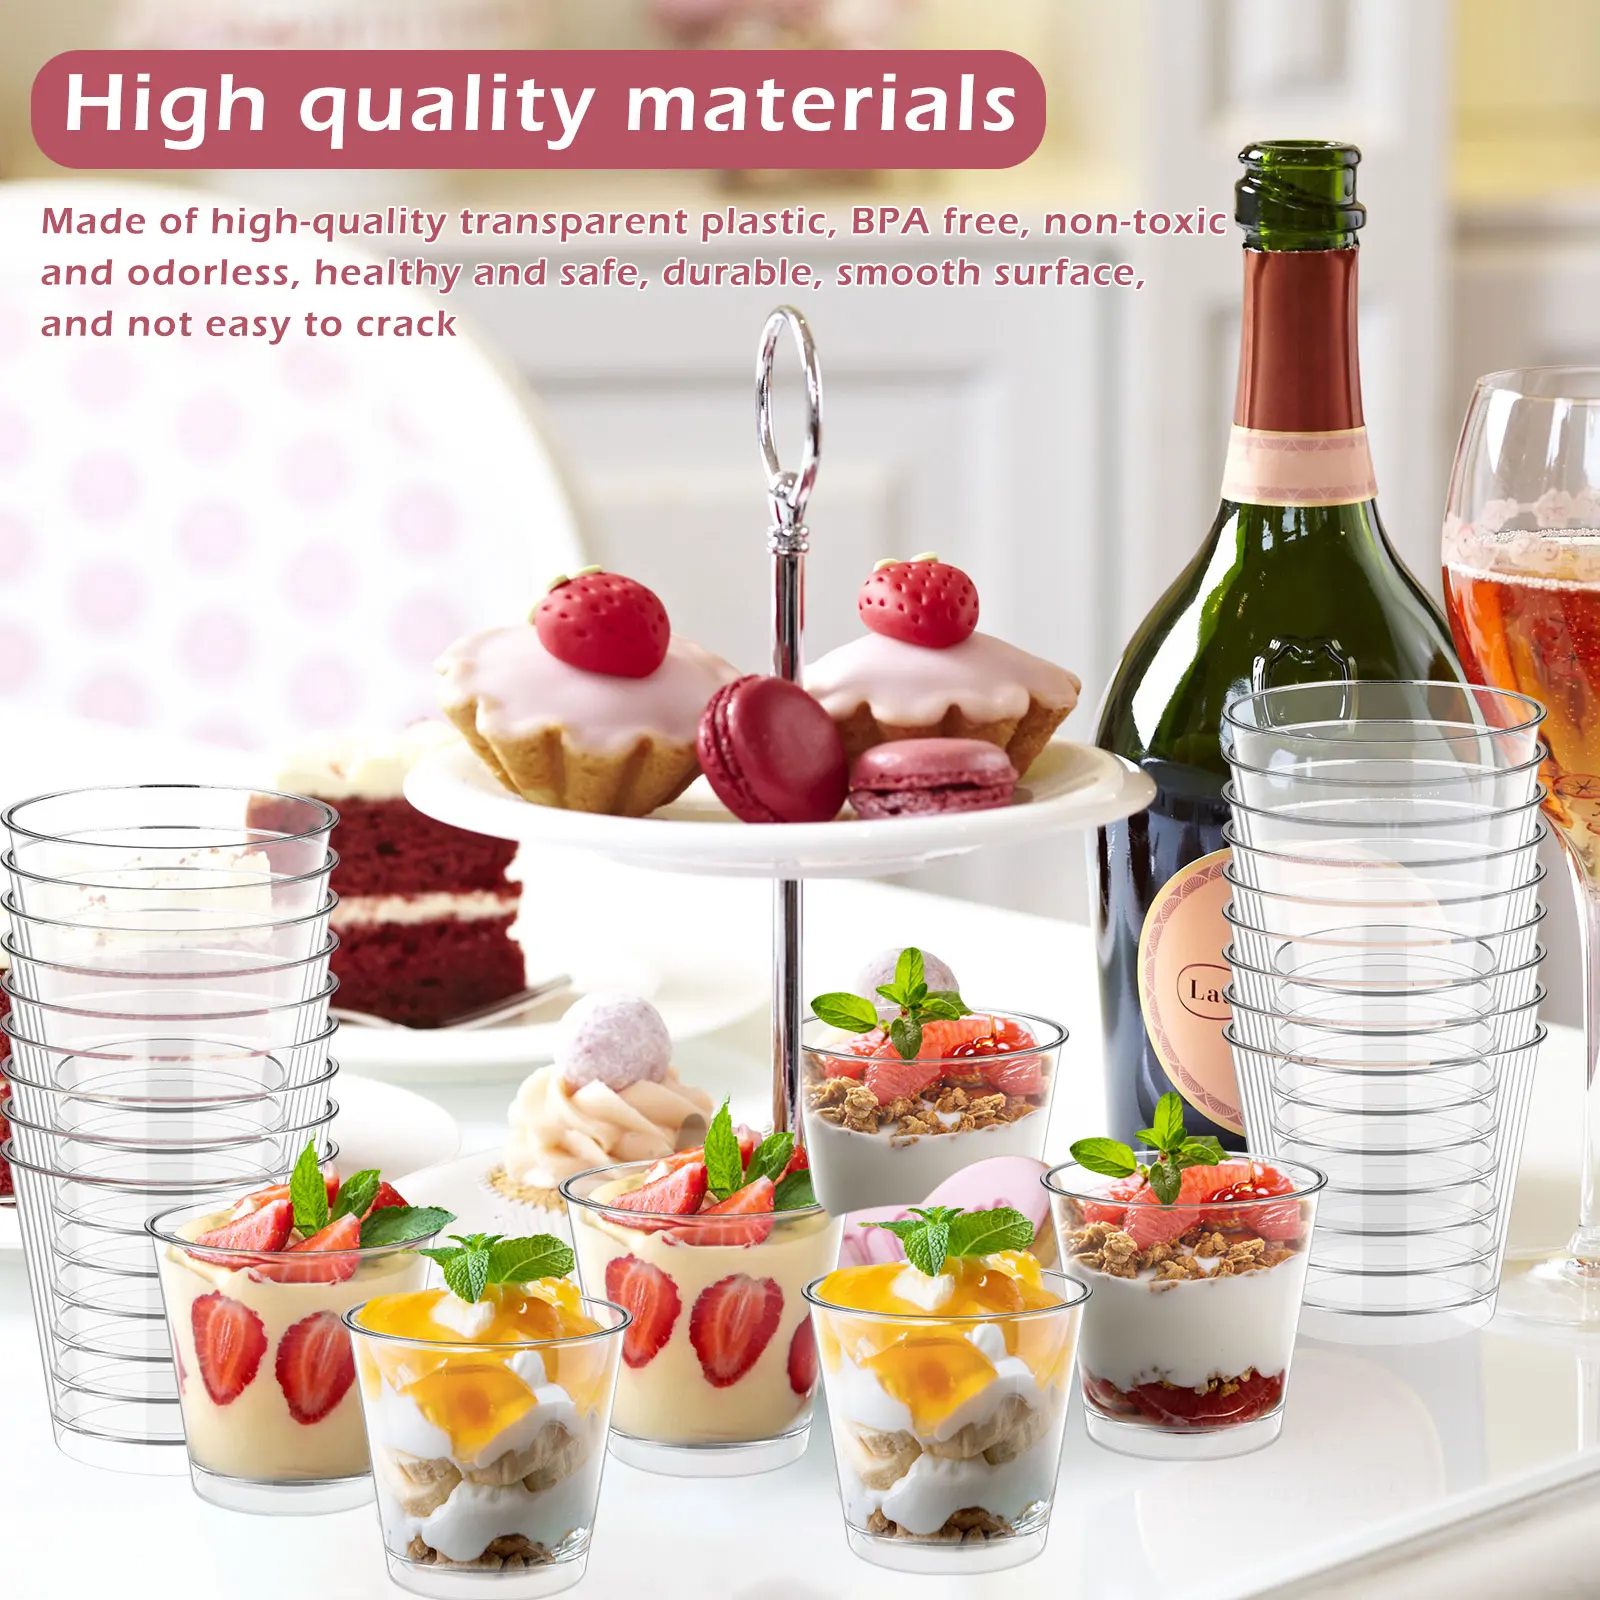 https://ae01.alicdn.com/kf/S391a041e700c441895378cd37b16b2bbY/50pcs-Mini-Dessert-Cups-Transparent-Party-Pudding-Mousse-Cake-Ice-Cream-Cup-Snacks-Appetizer-Bowl-For.jpg